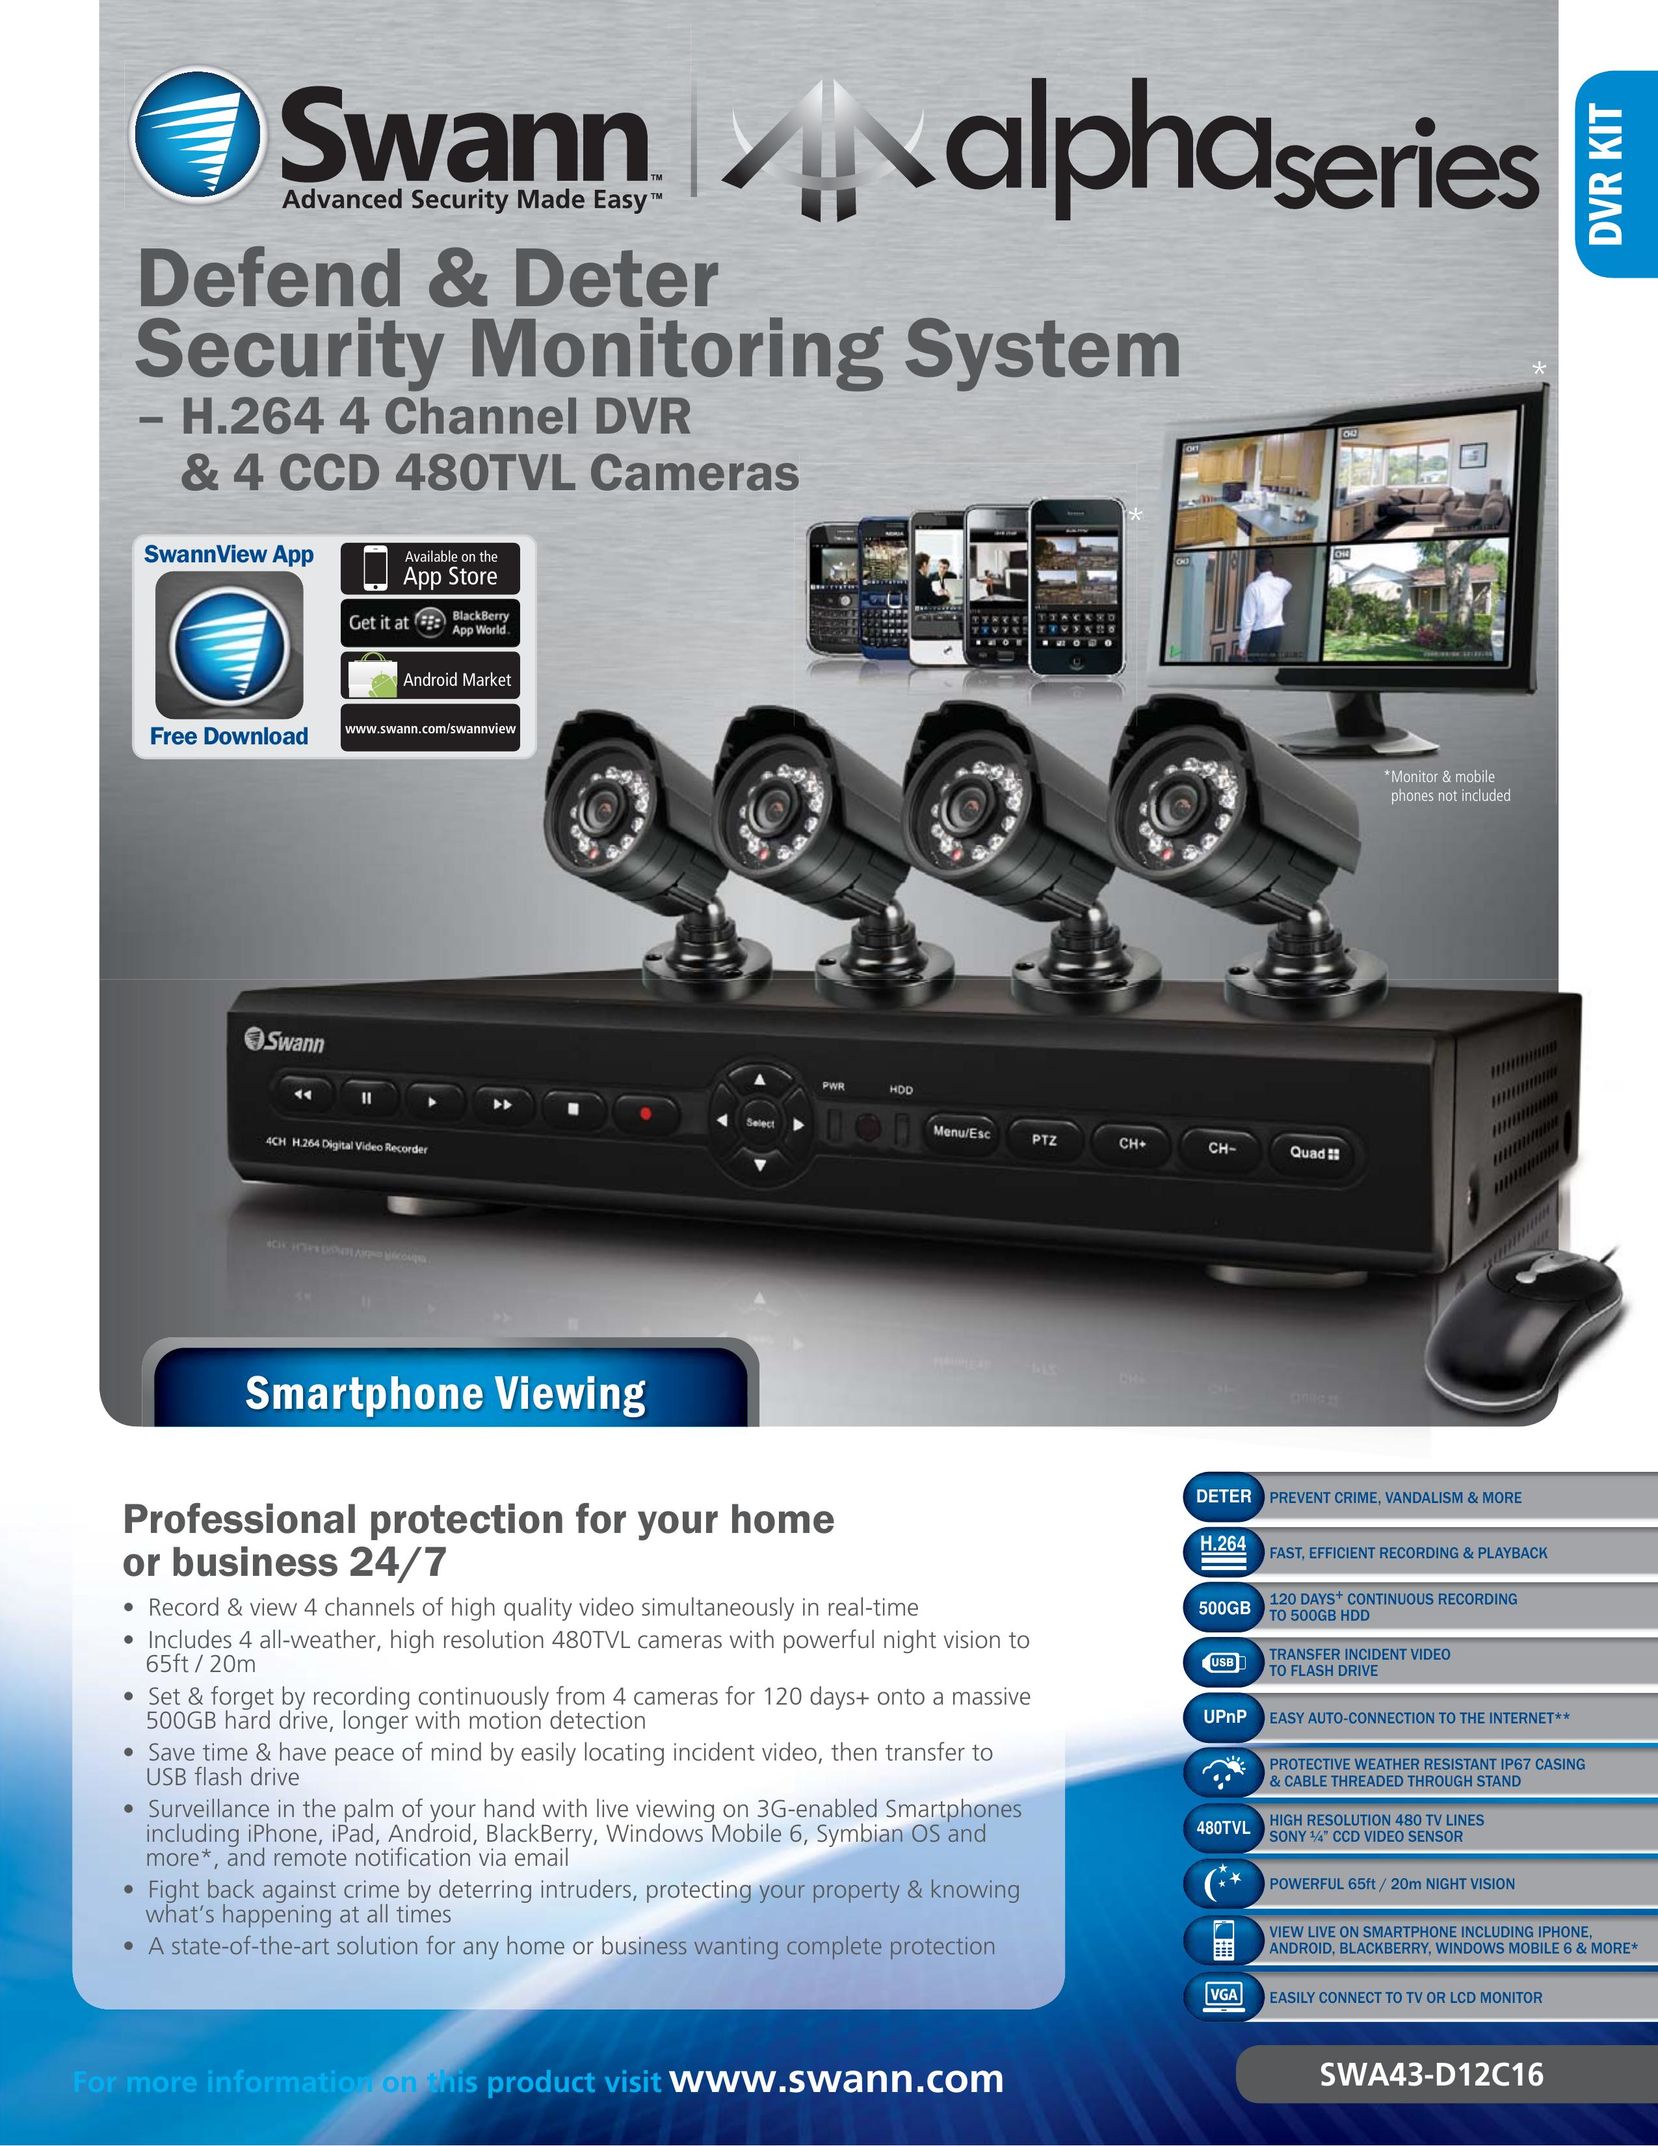 Swann SWA43-D12C16 Home Security System User Manual